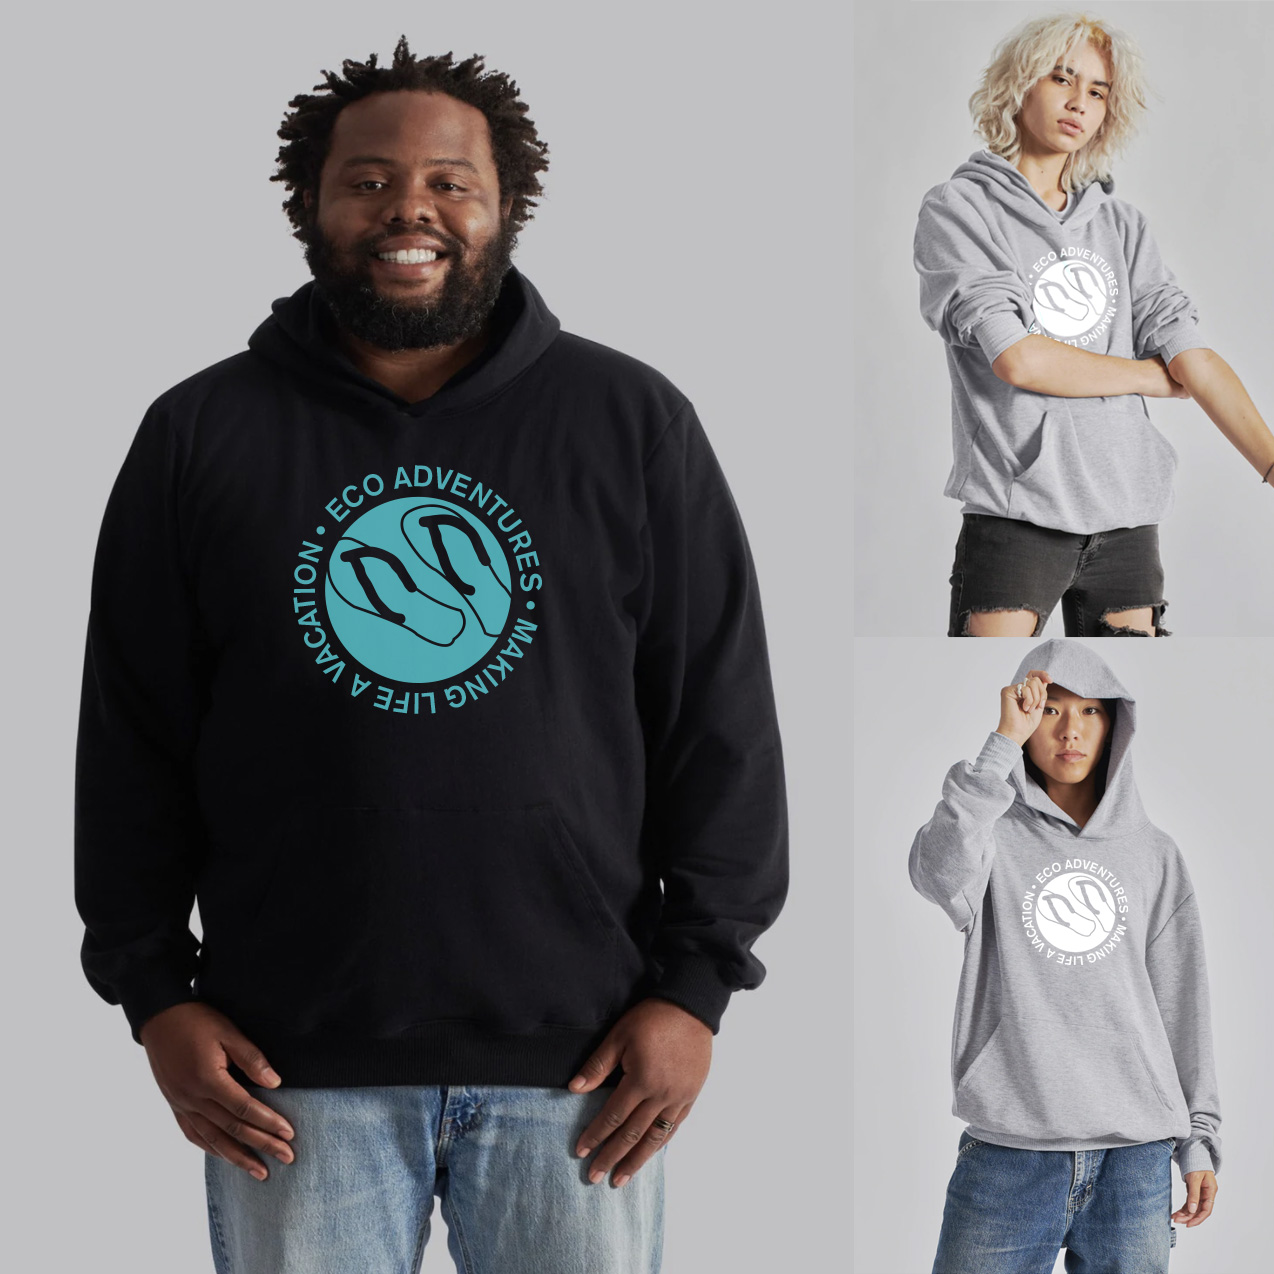 100% Recycled Cotton Pullover Hoodie, Unisex